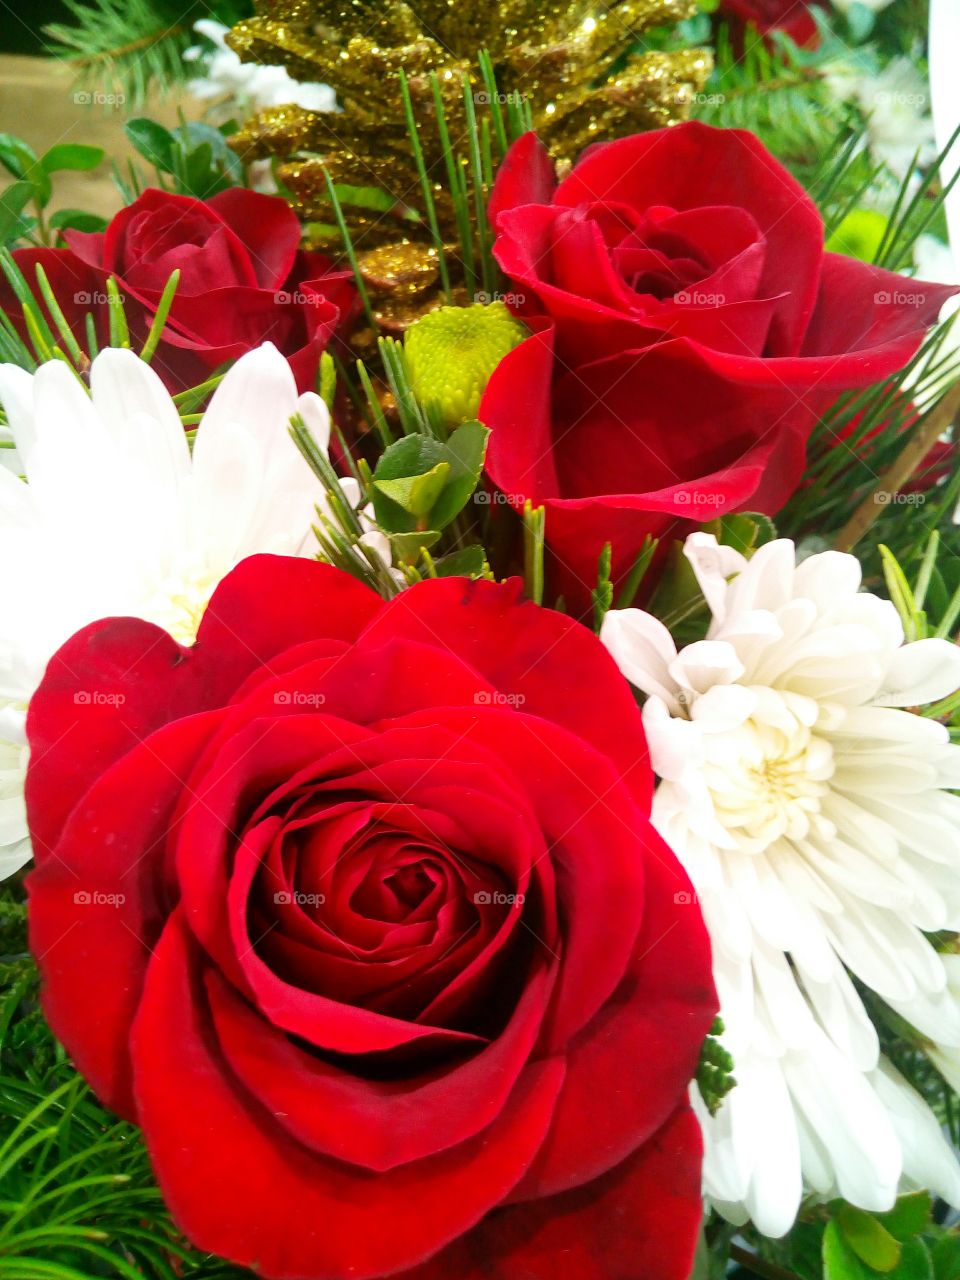 Beautiful Red roses, white flowers and holiday Colors!